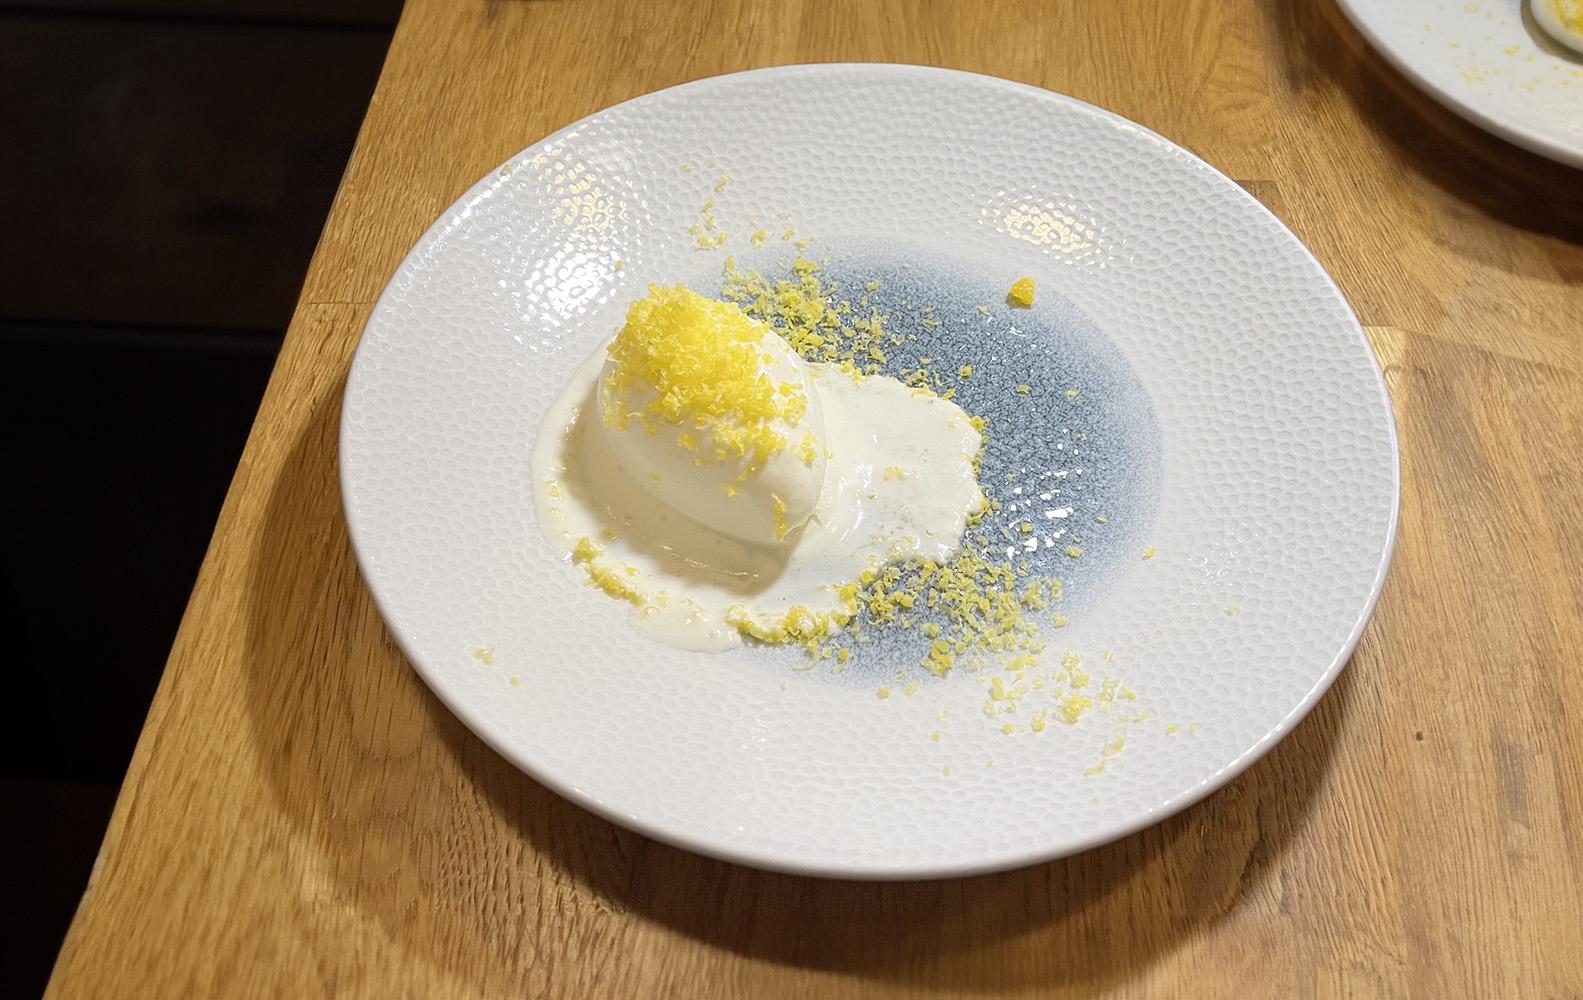 Meringue Gelato with Straus Cream and Salted Cured Egg Yolk at Kali Restaurant in Los Angeles (Photo by Julie Nguyen)